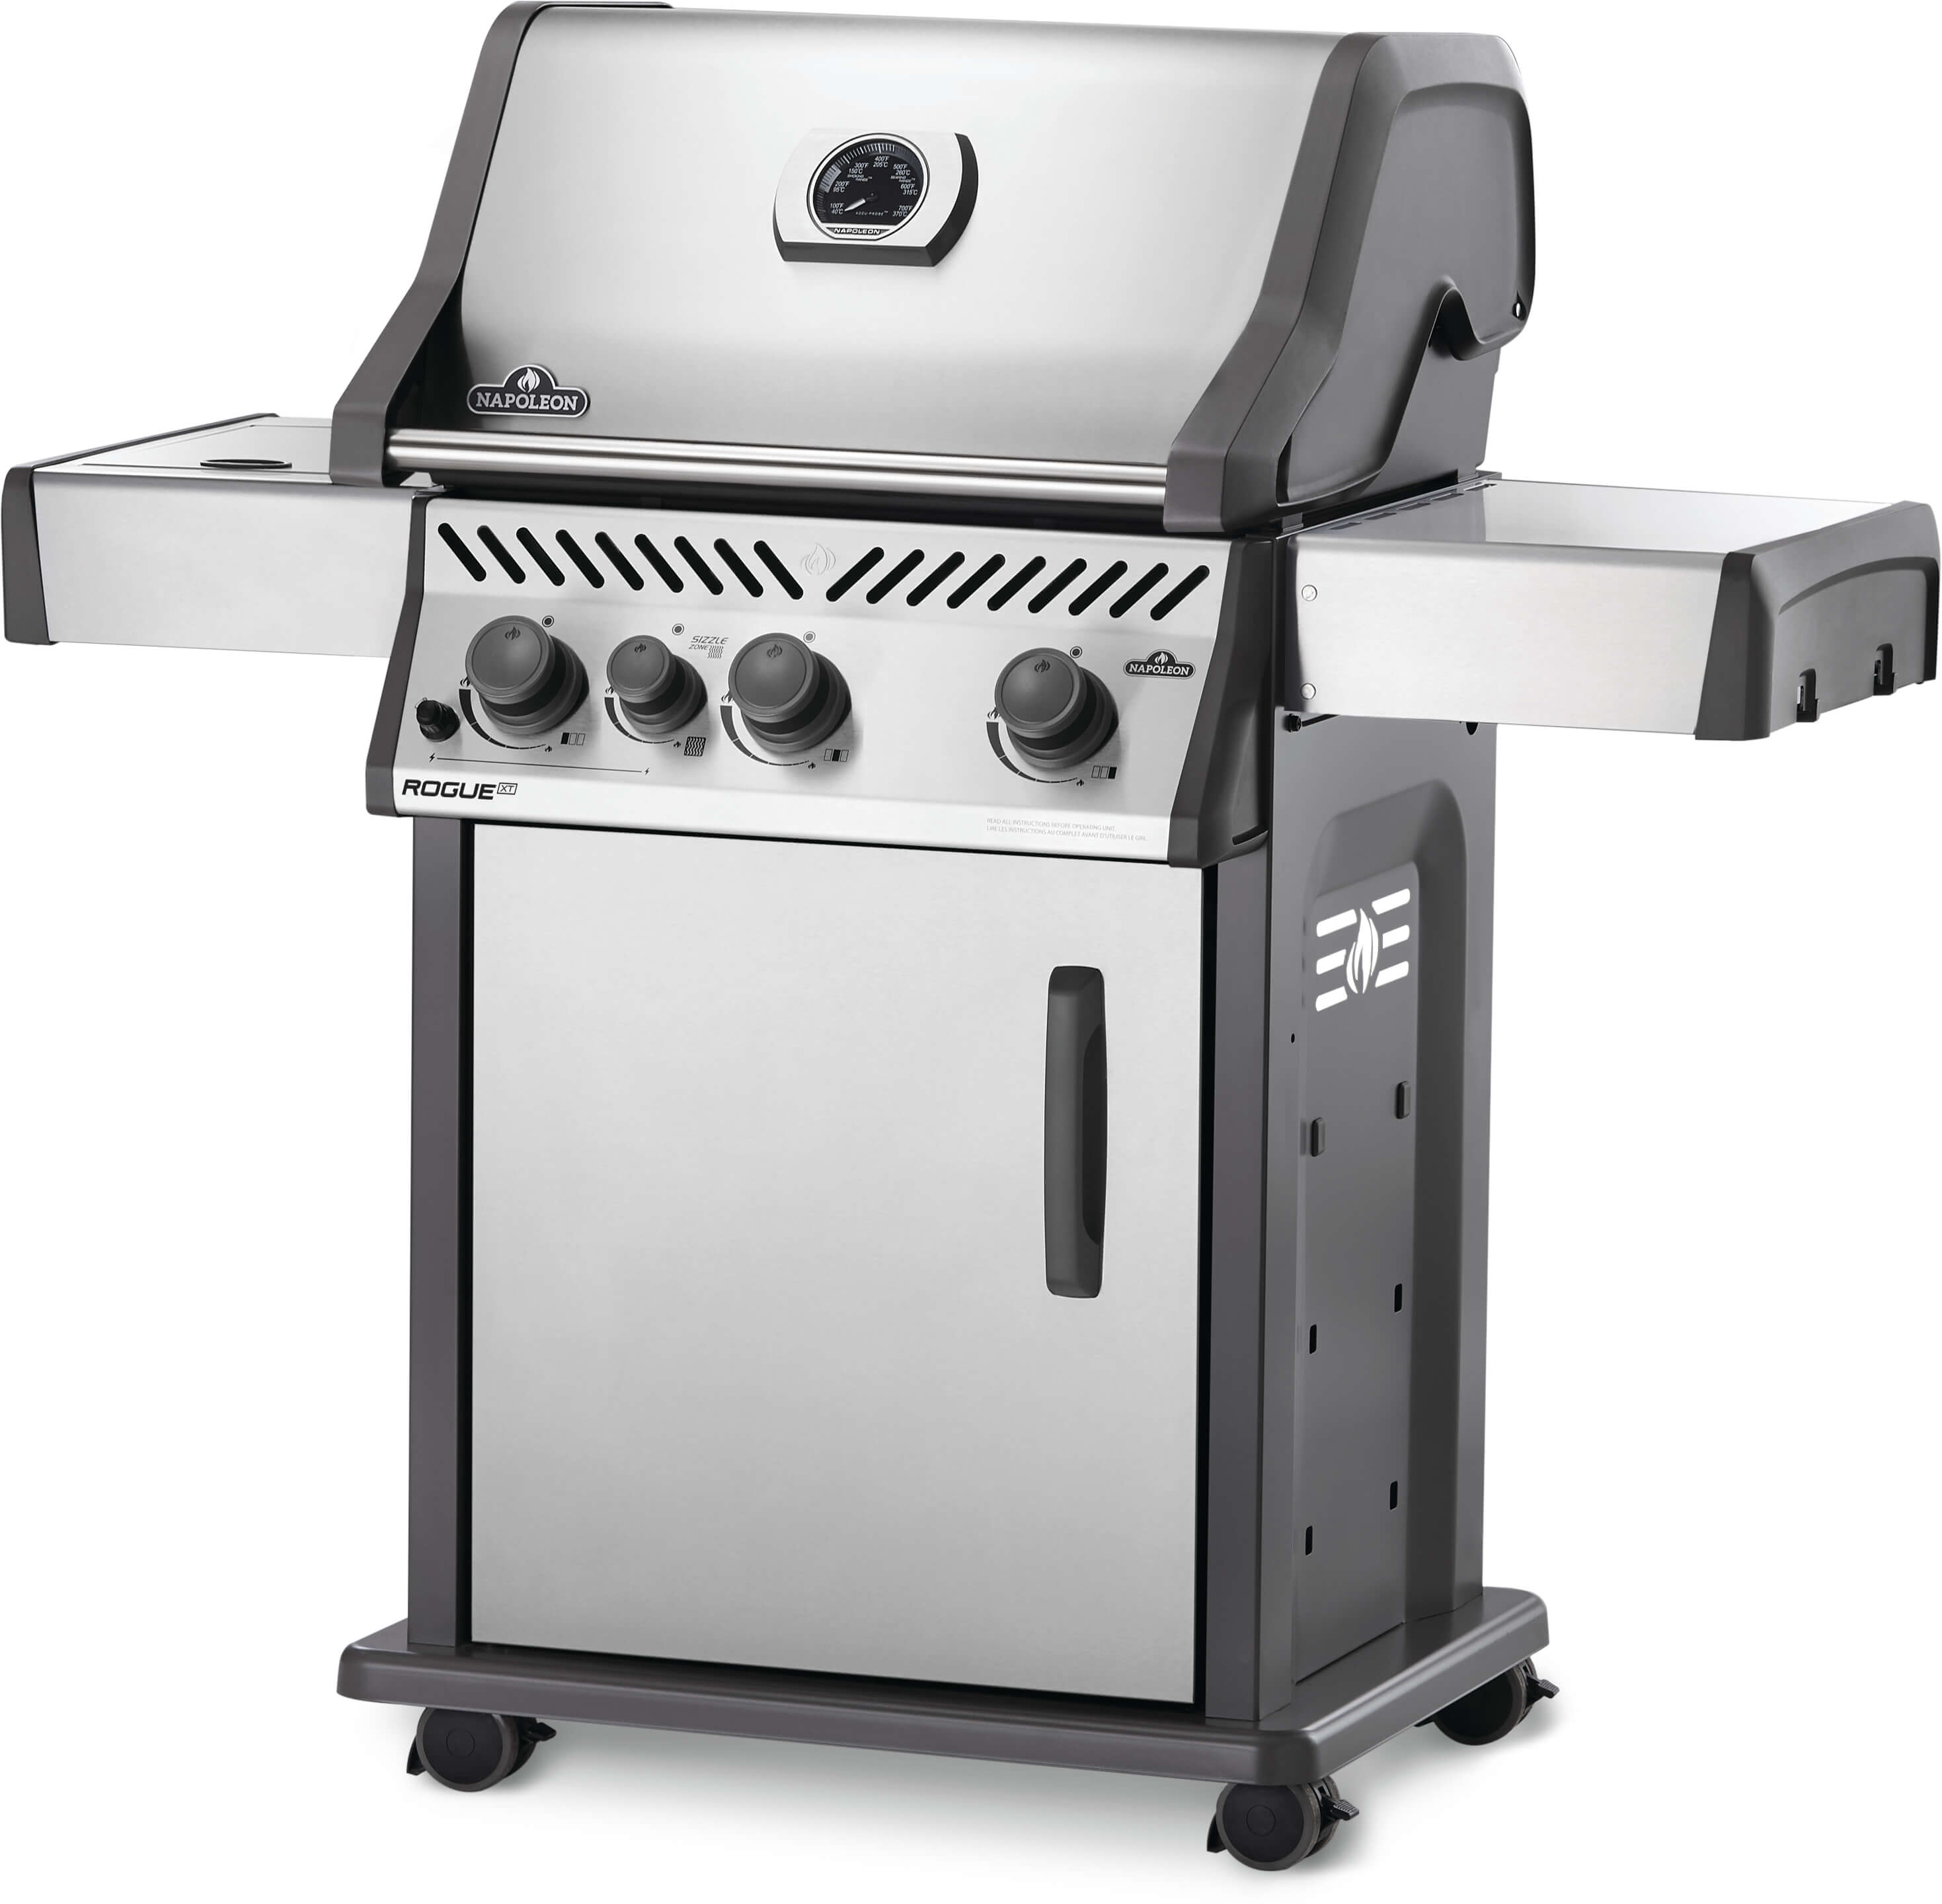 Rogue® XT 425 Natural Gas Grill with Infrared Side Burner, Stainless Steel - image 2 of 12